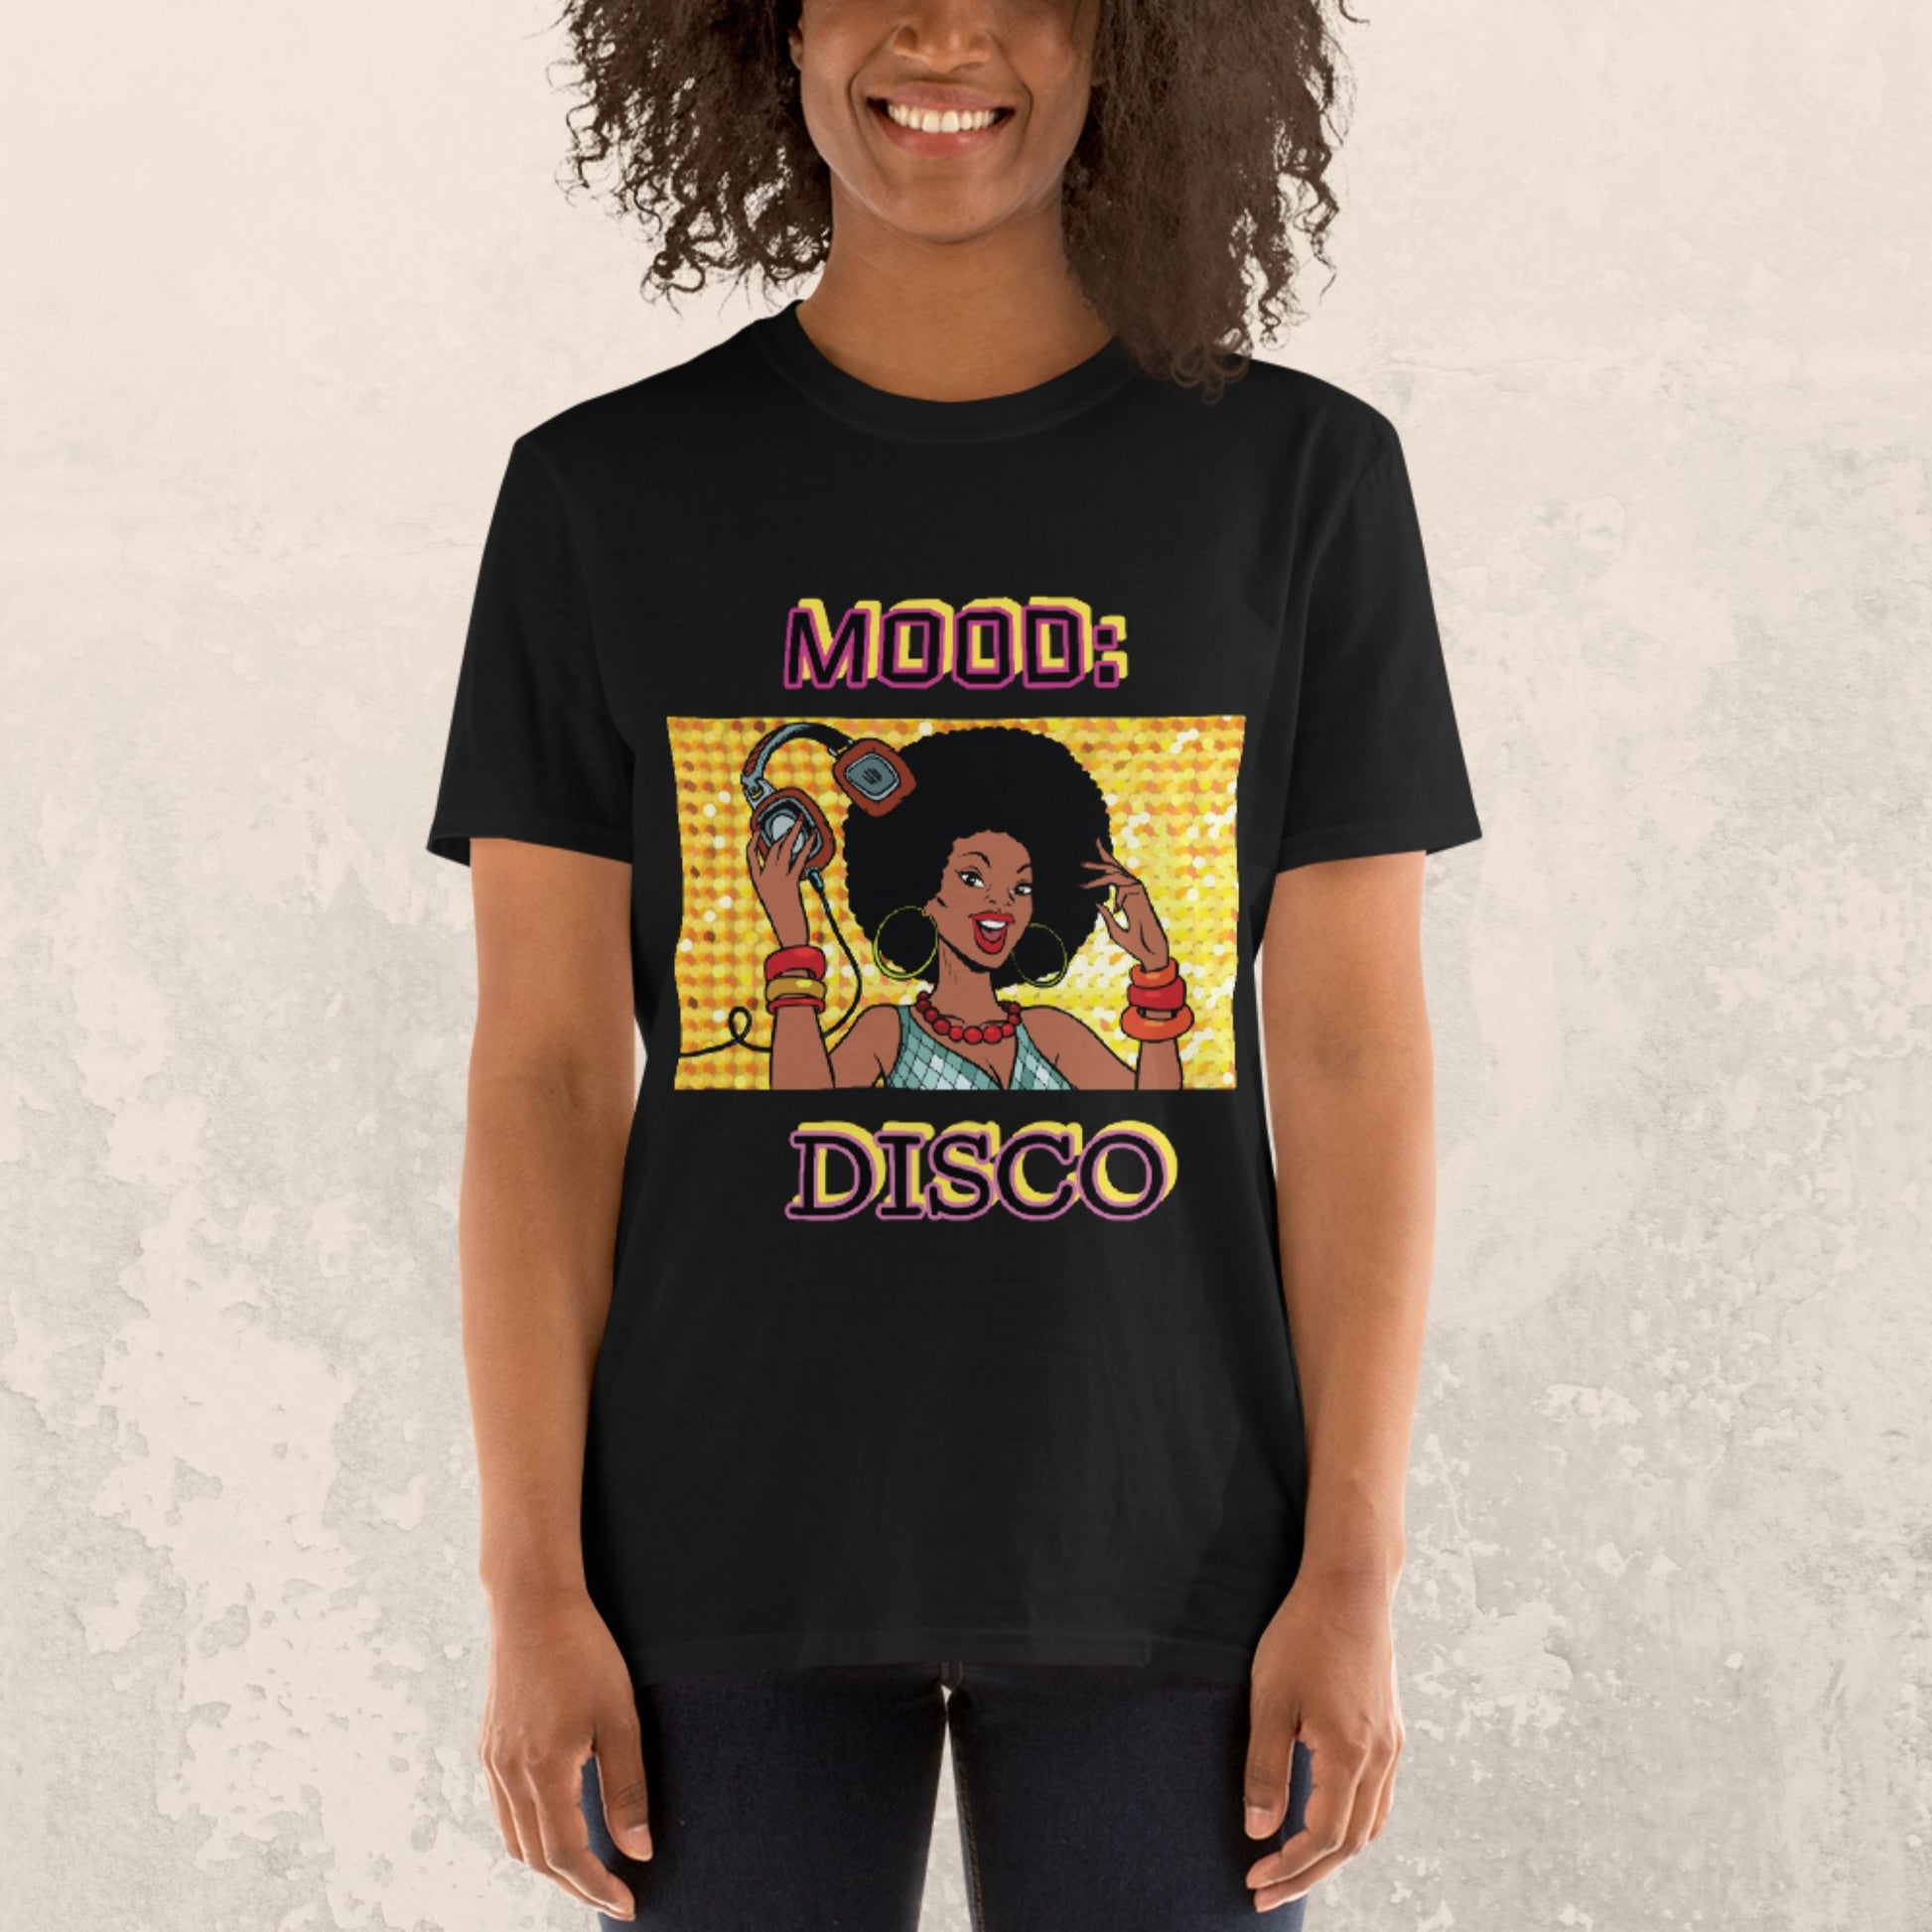 Mood: Disco Short Sleeve Unisex T-Shirt - BeExtra! Apparel & More